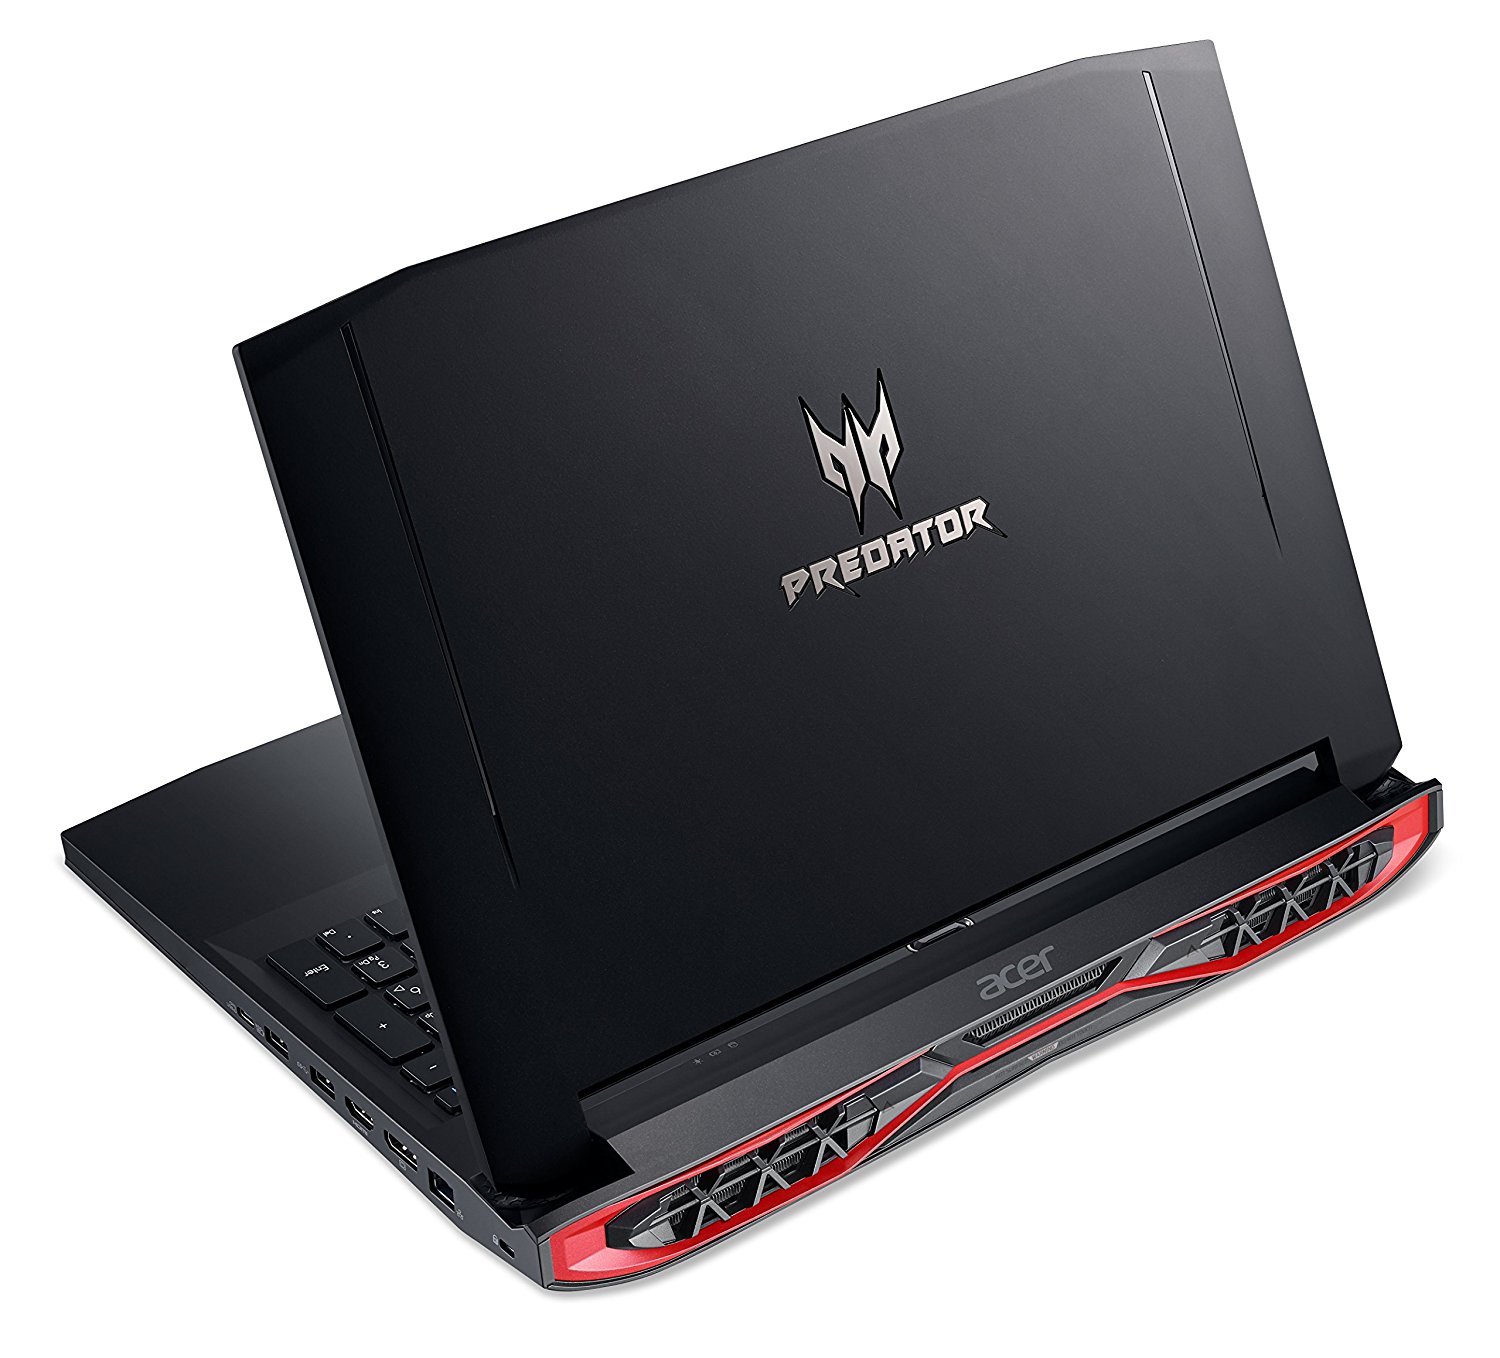  Acer Predator 15  Review An Affordable Gaming Powerhouse